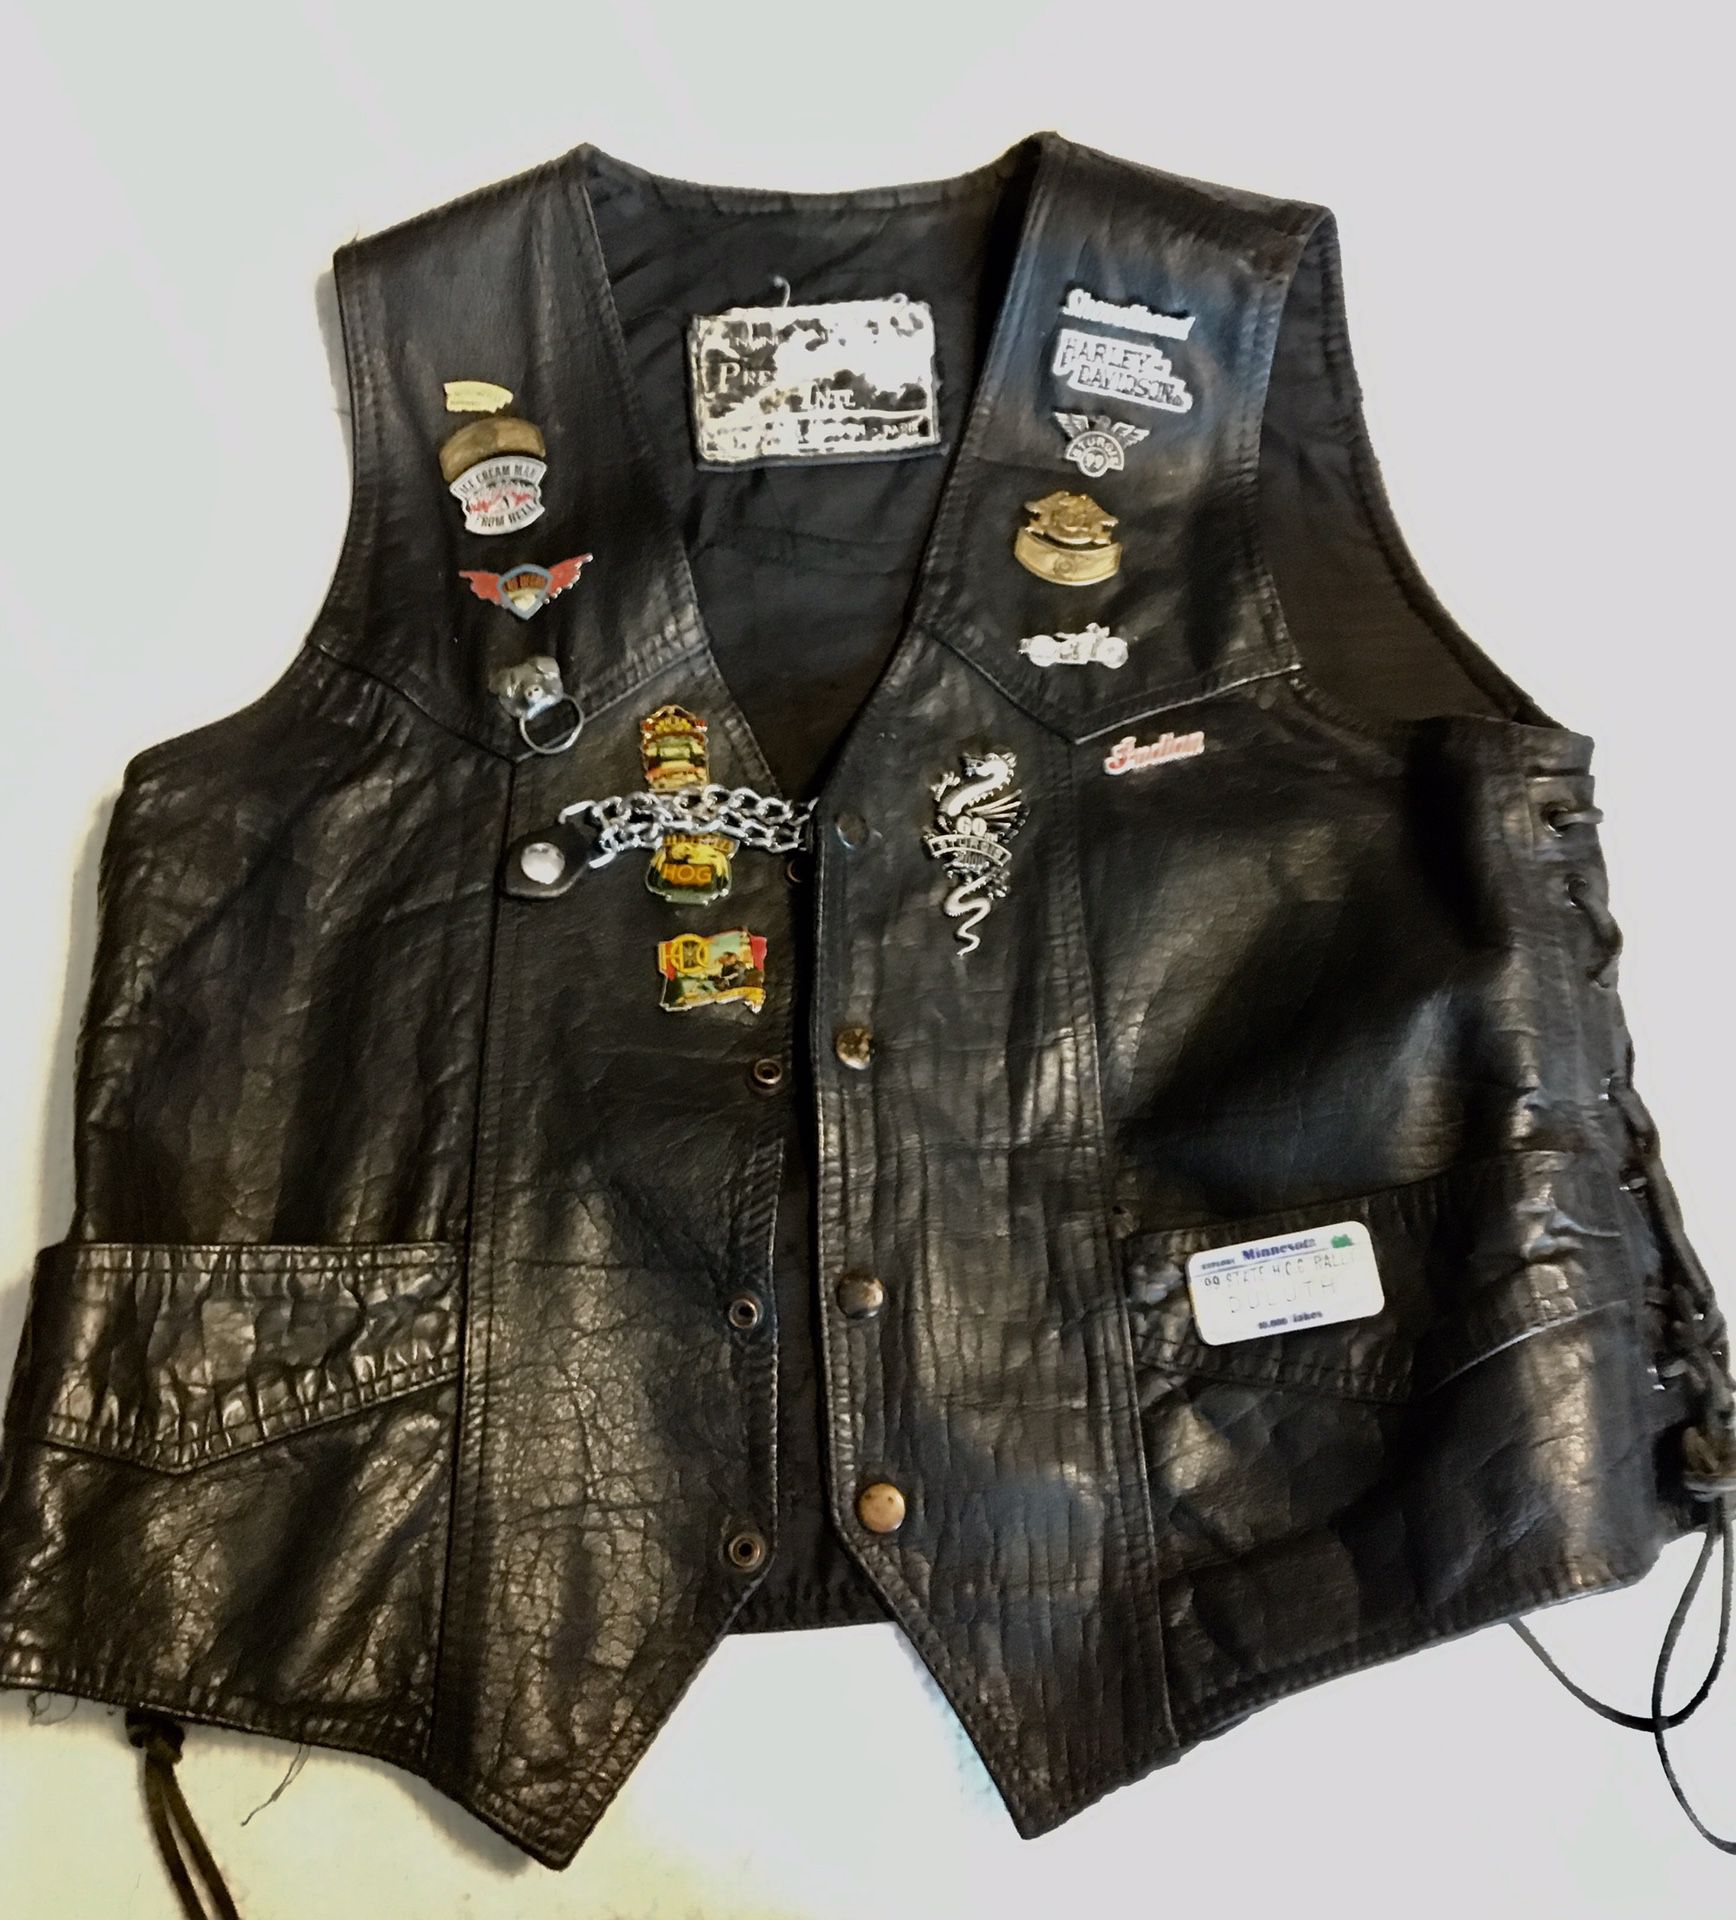 Heavyweight LEATHER BIKER VEST Riding Gear Size Med, LG or XL includes Pins c